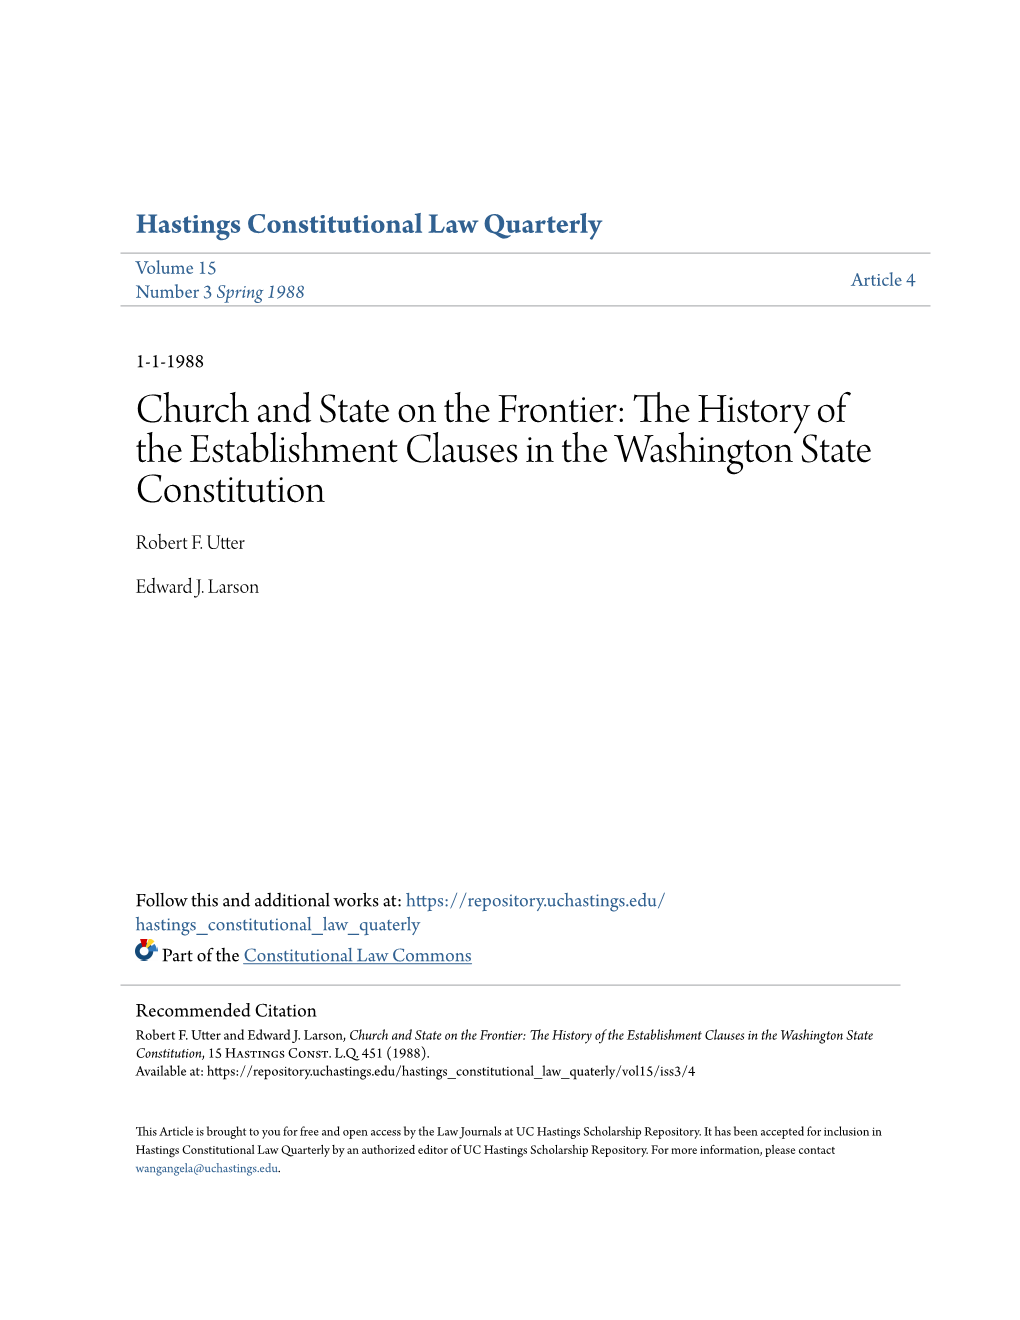 Church and State on the Frontier: the Ih Story of the Establishment Clauses in the Washington State Constitution Robert F